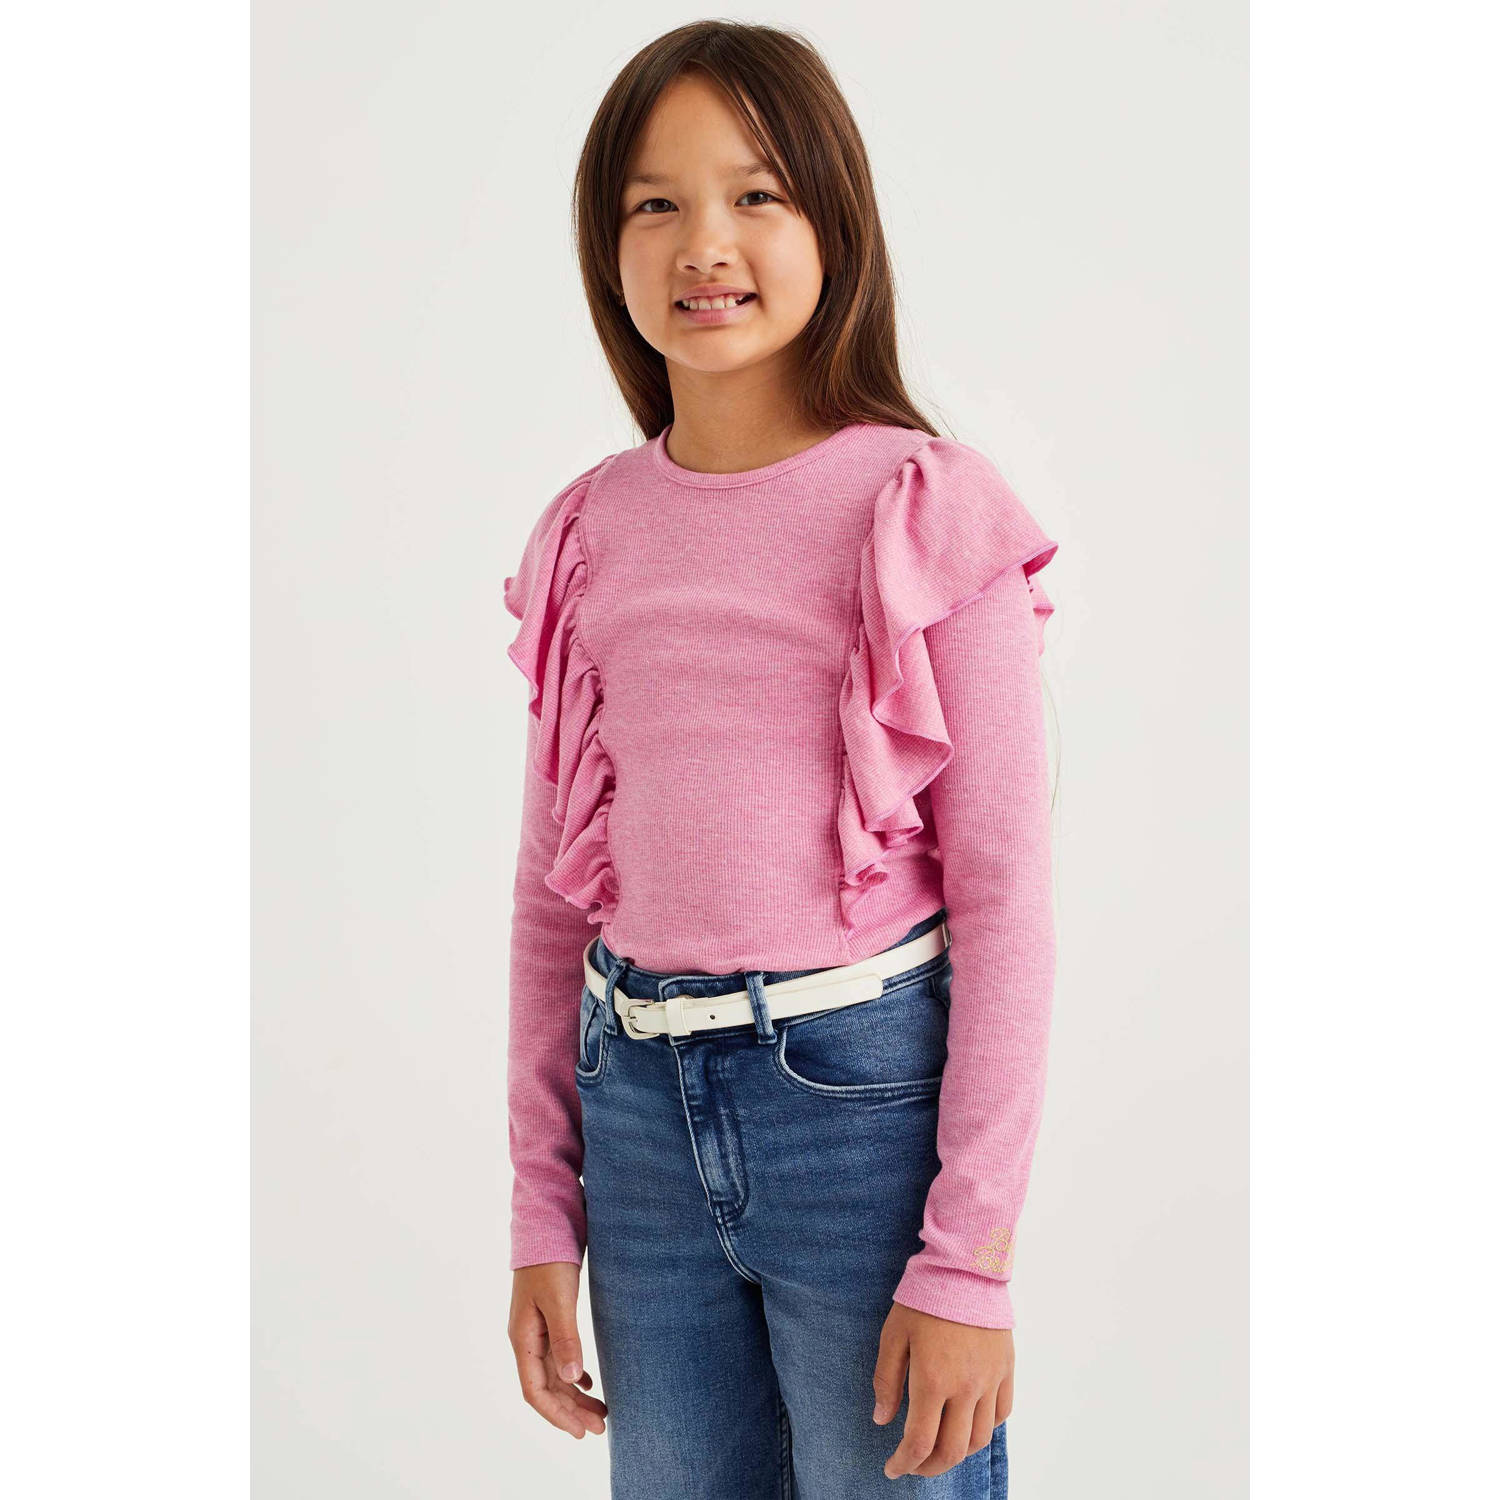 WE Fashion longsleeve met ruches roze Meisjes Polyester Ronde hals 122 128